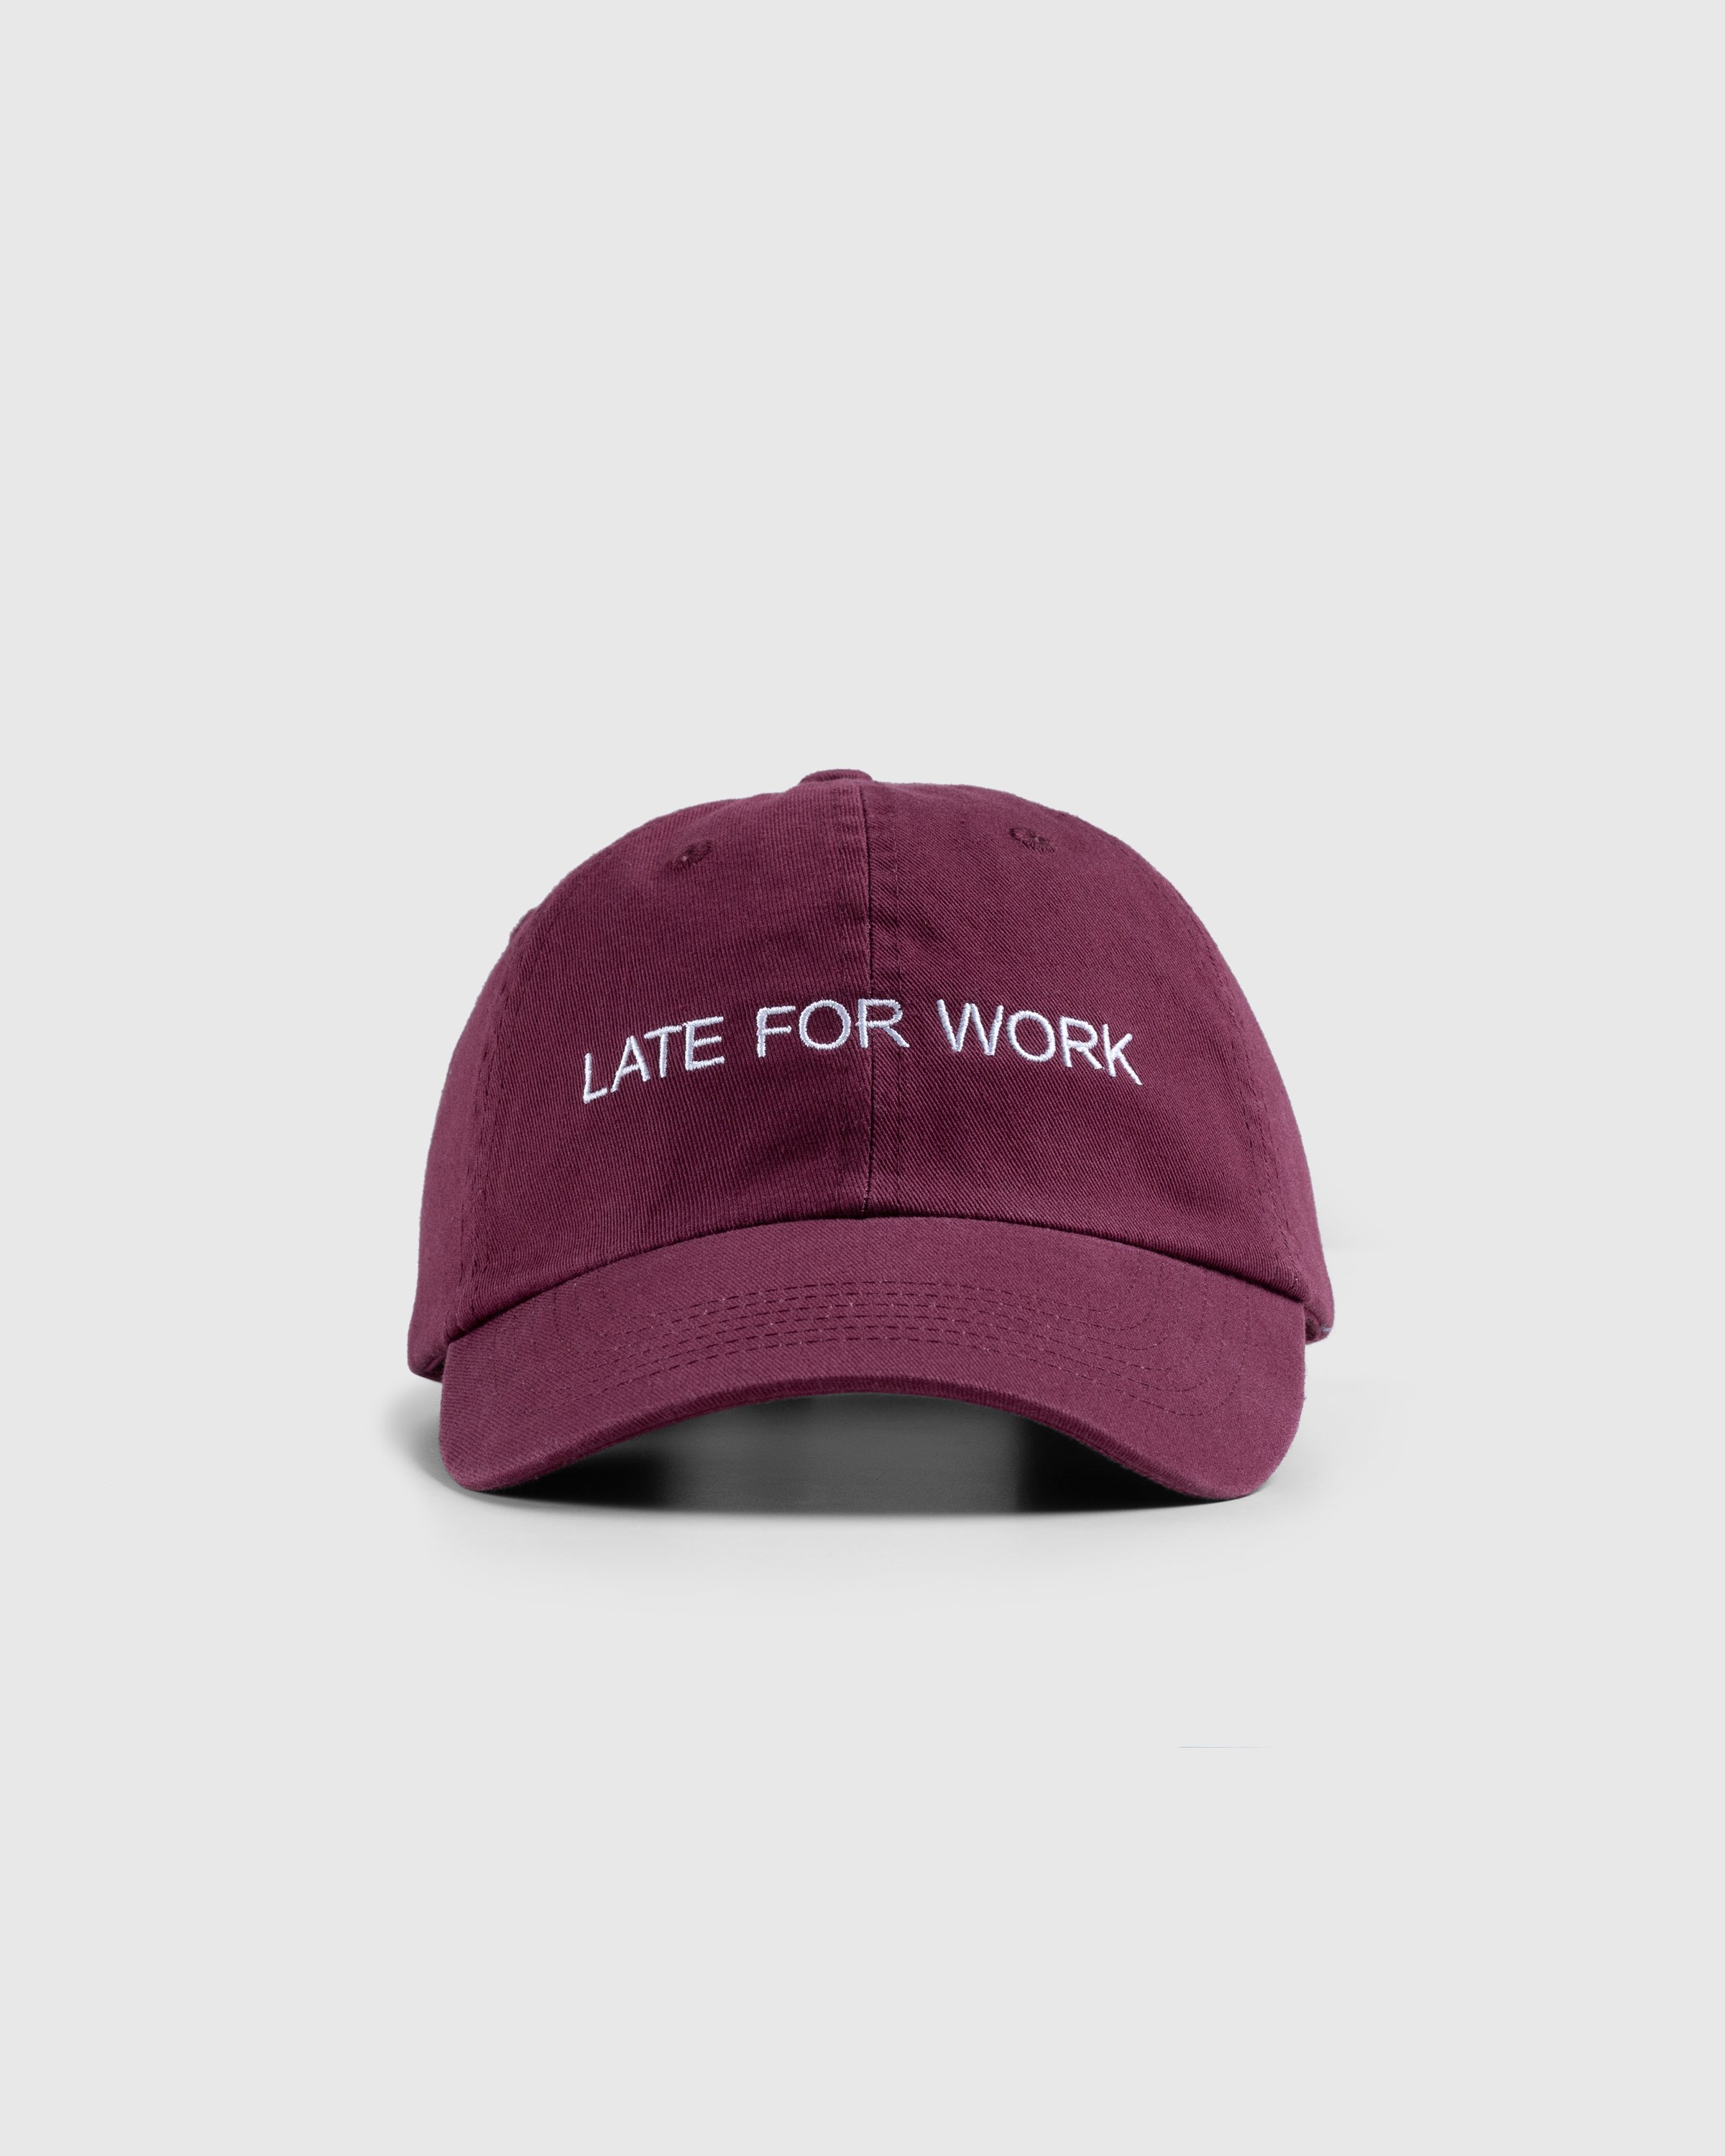 HO HO COCO - Late For Work Cap Red - Accessories - Red - Image 2